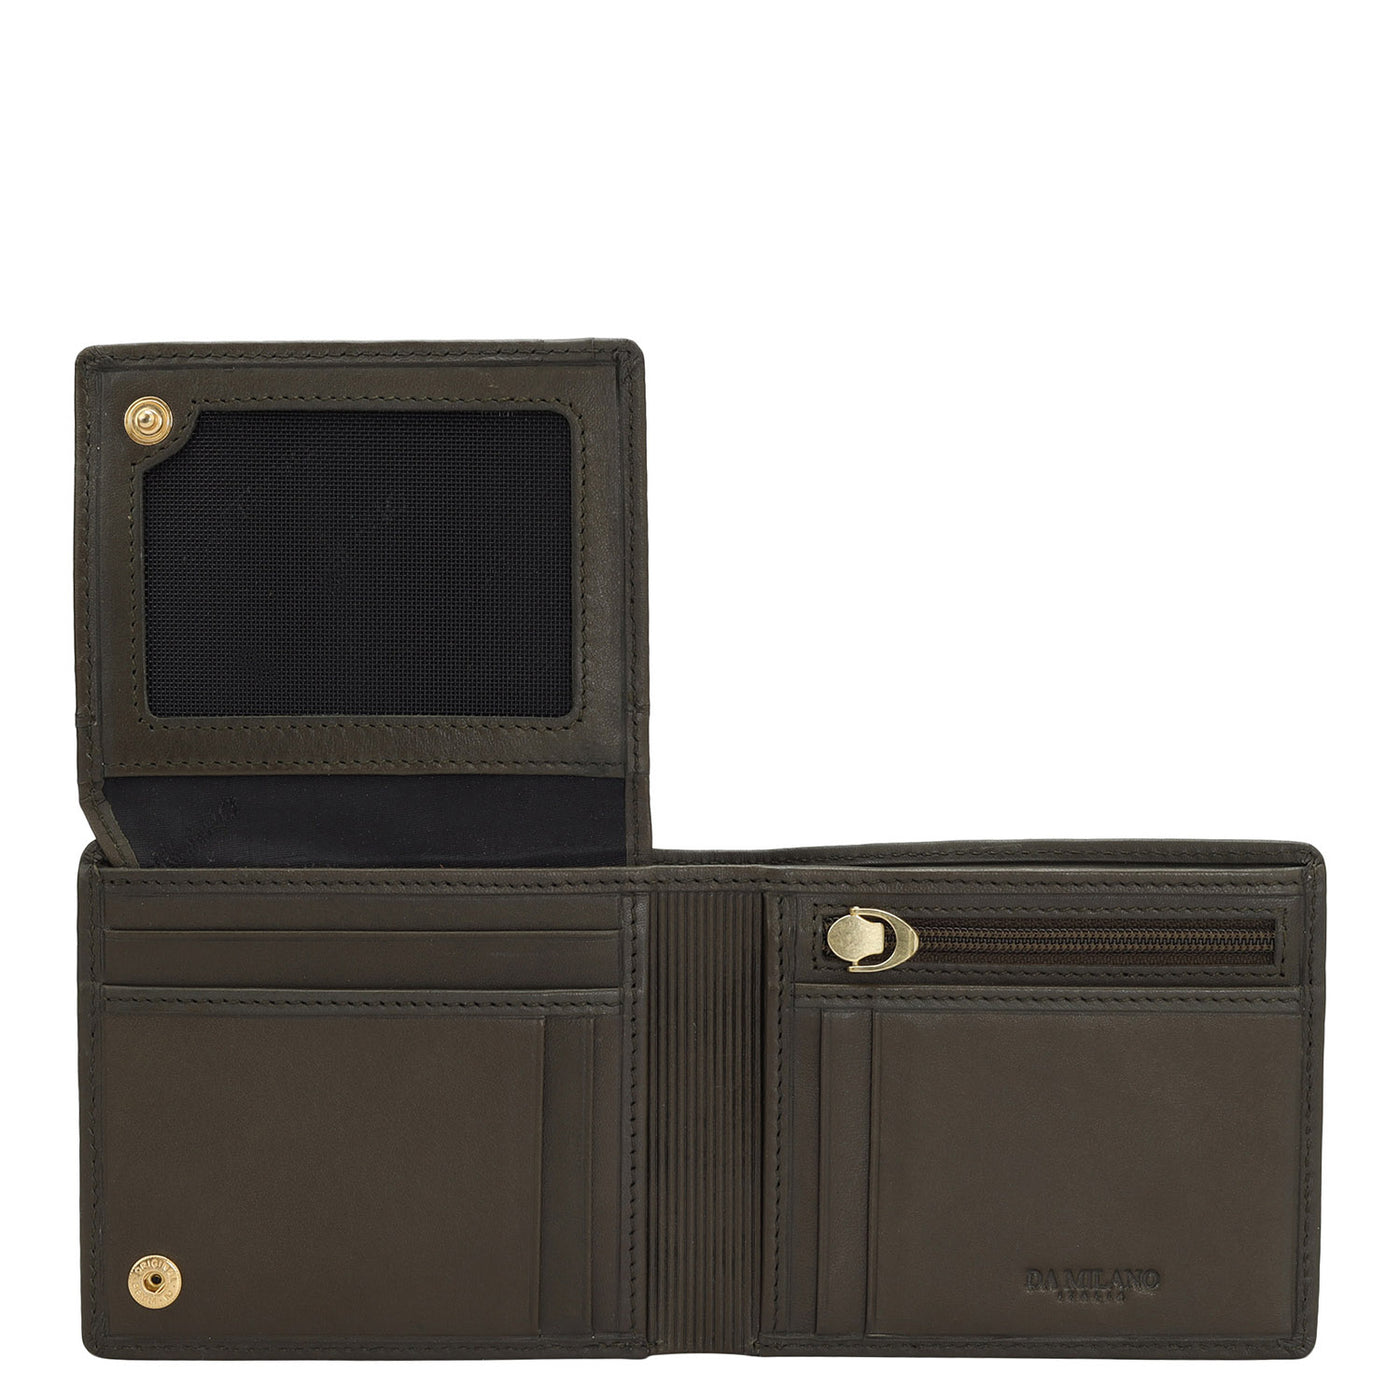 Calf Leather Mens Wallet - Olive